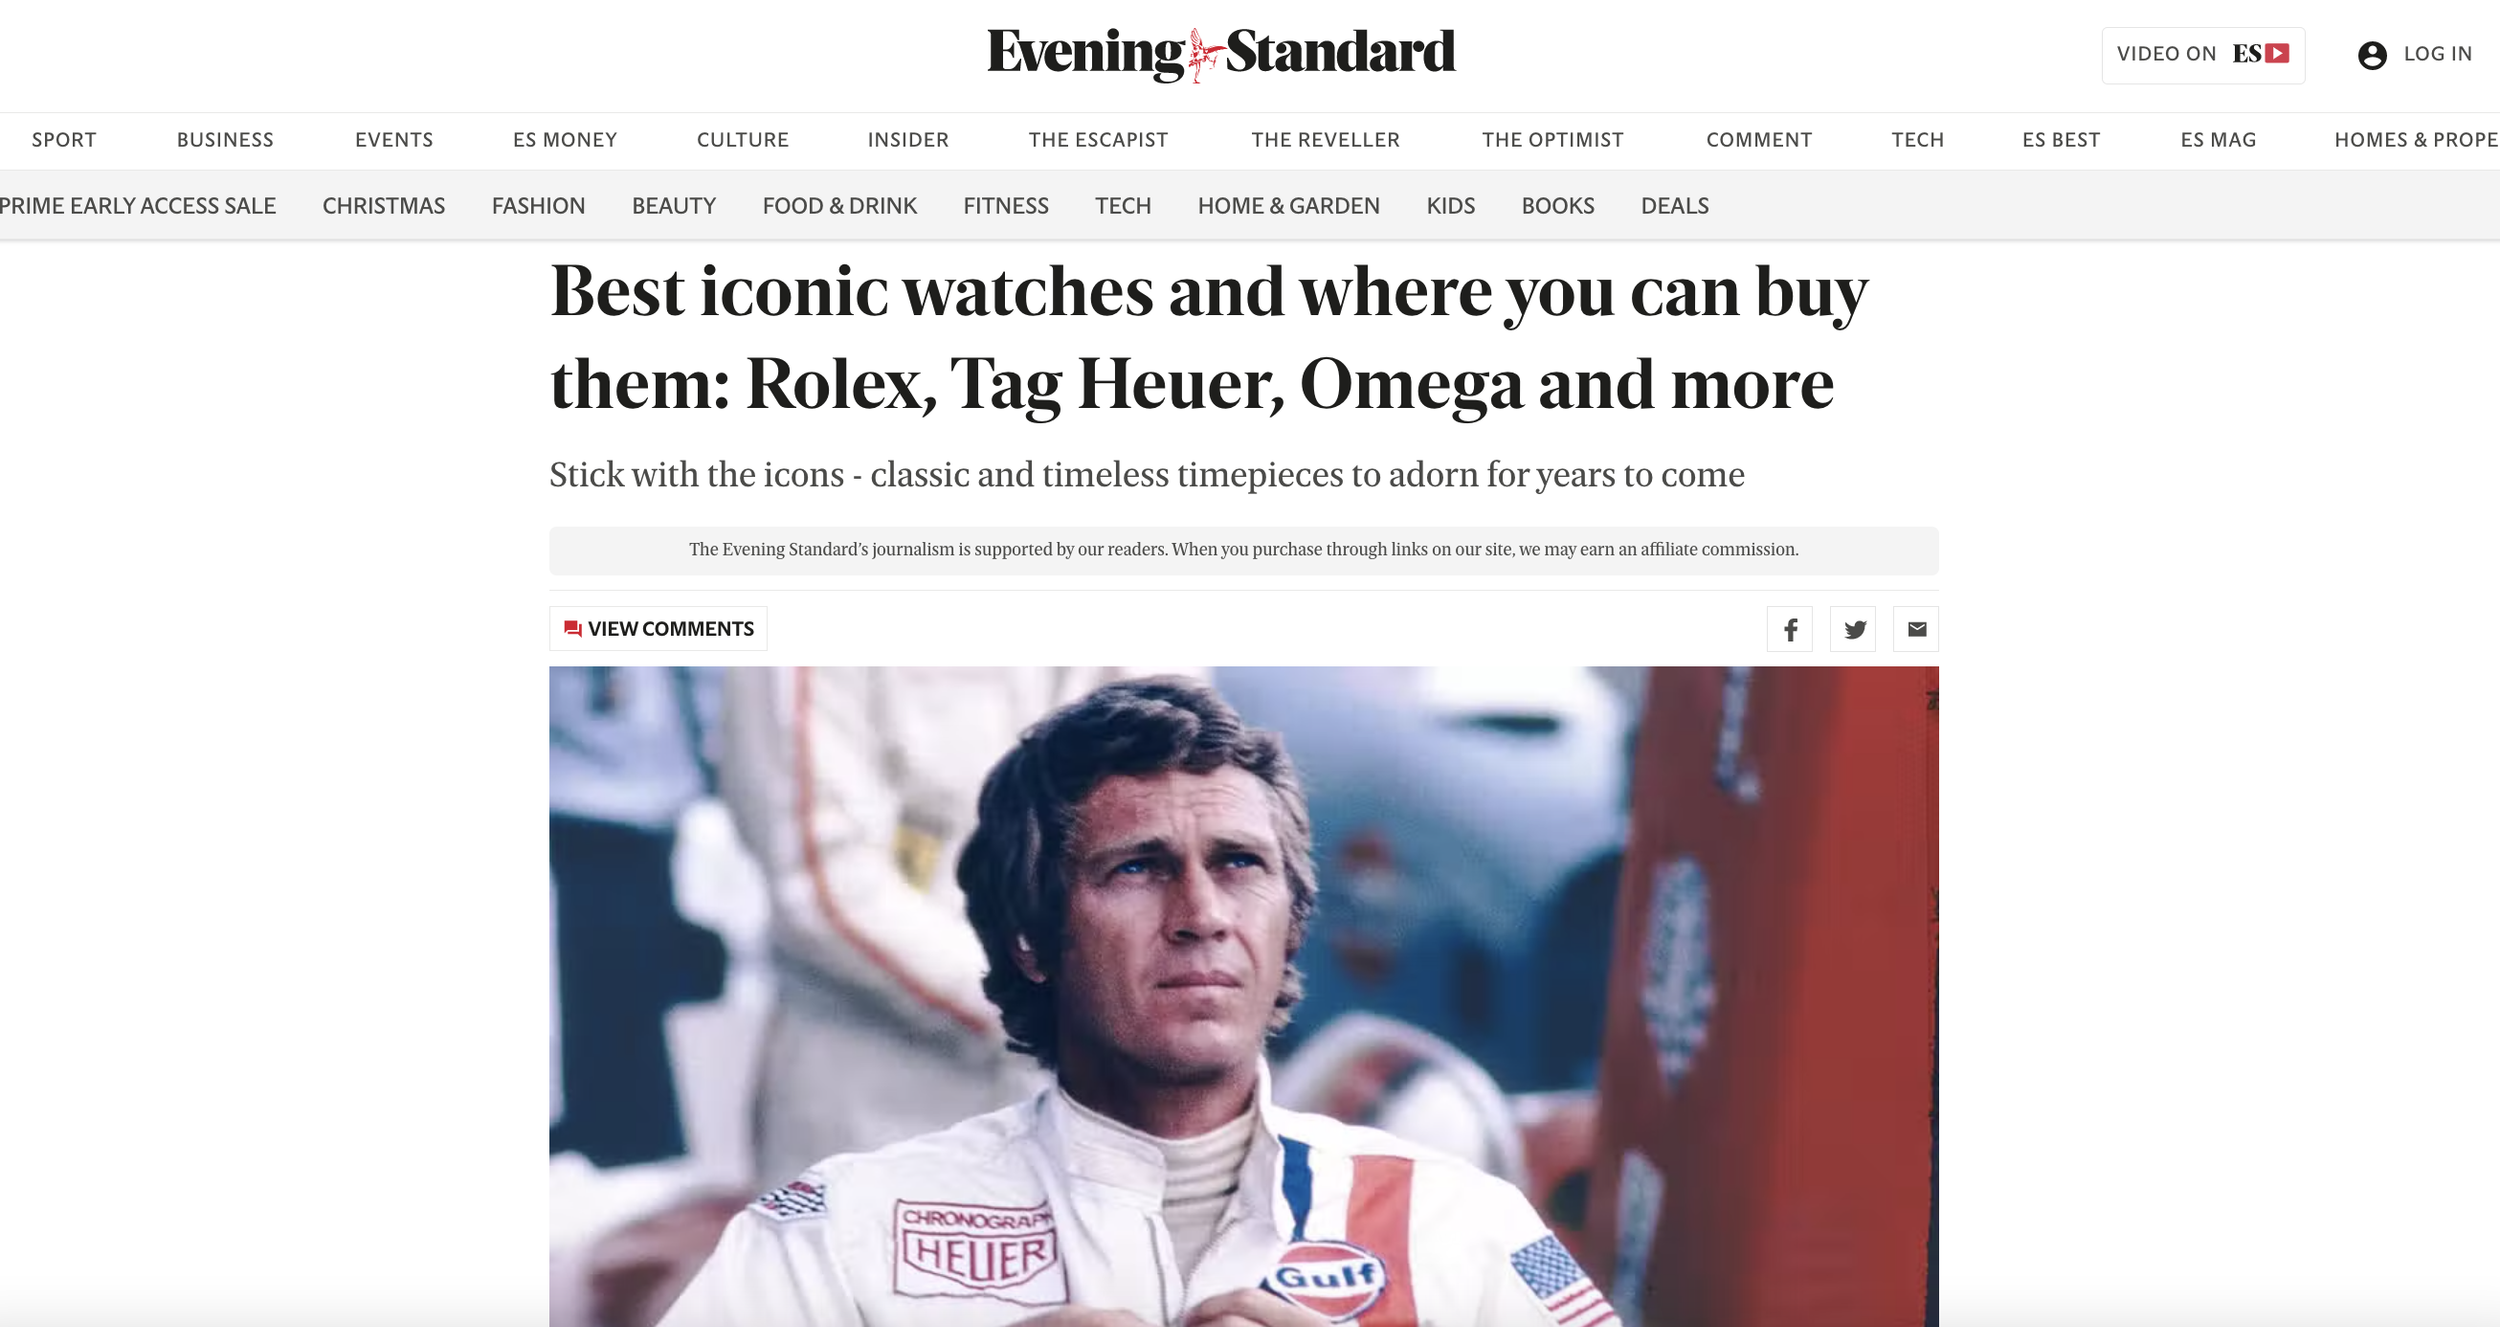 Evening Standard - Iconic watches and where to buy them